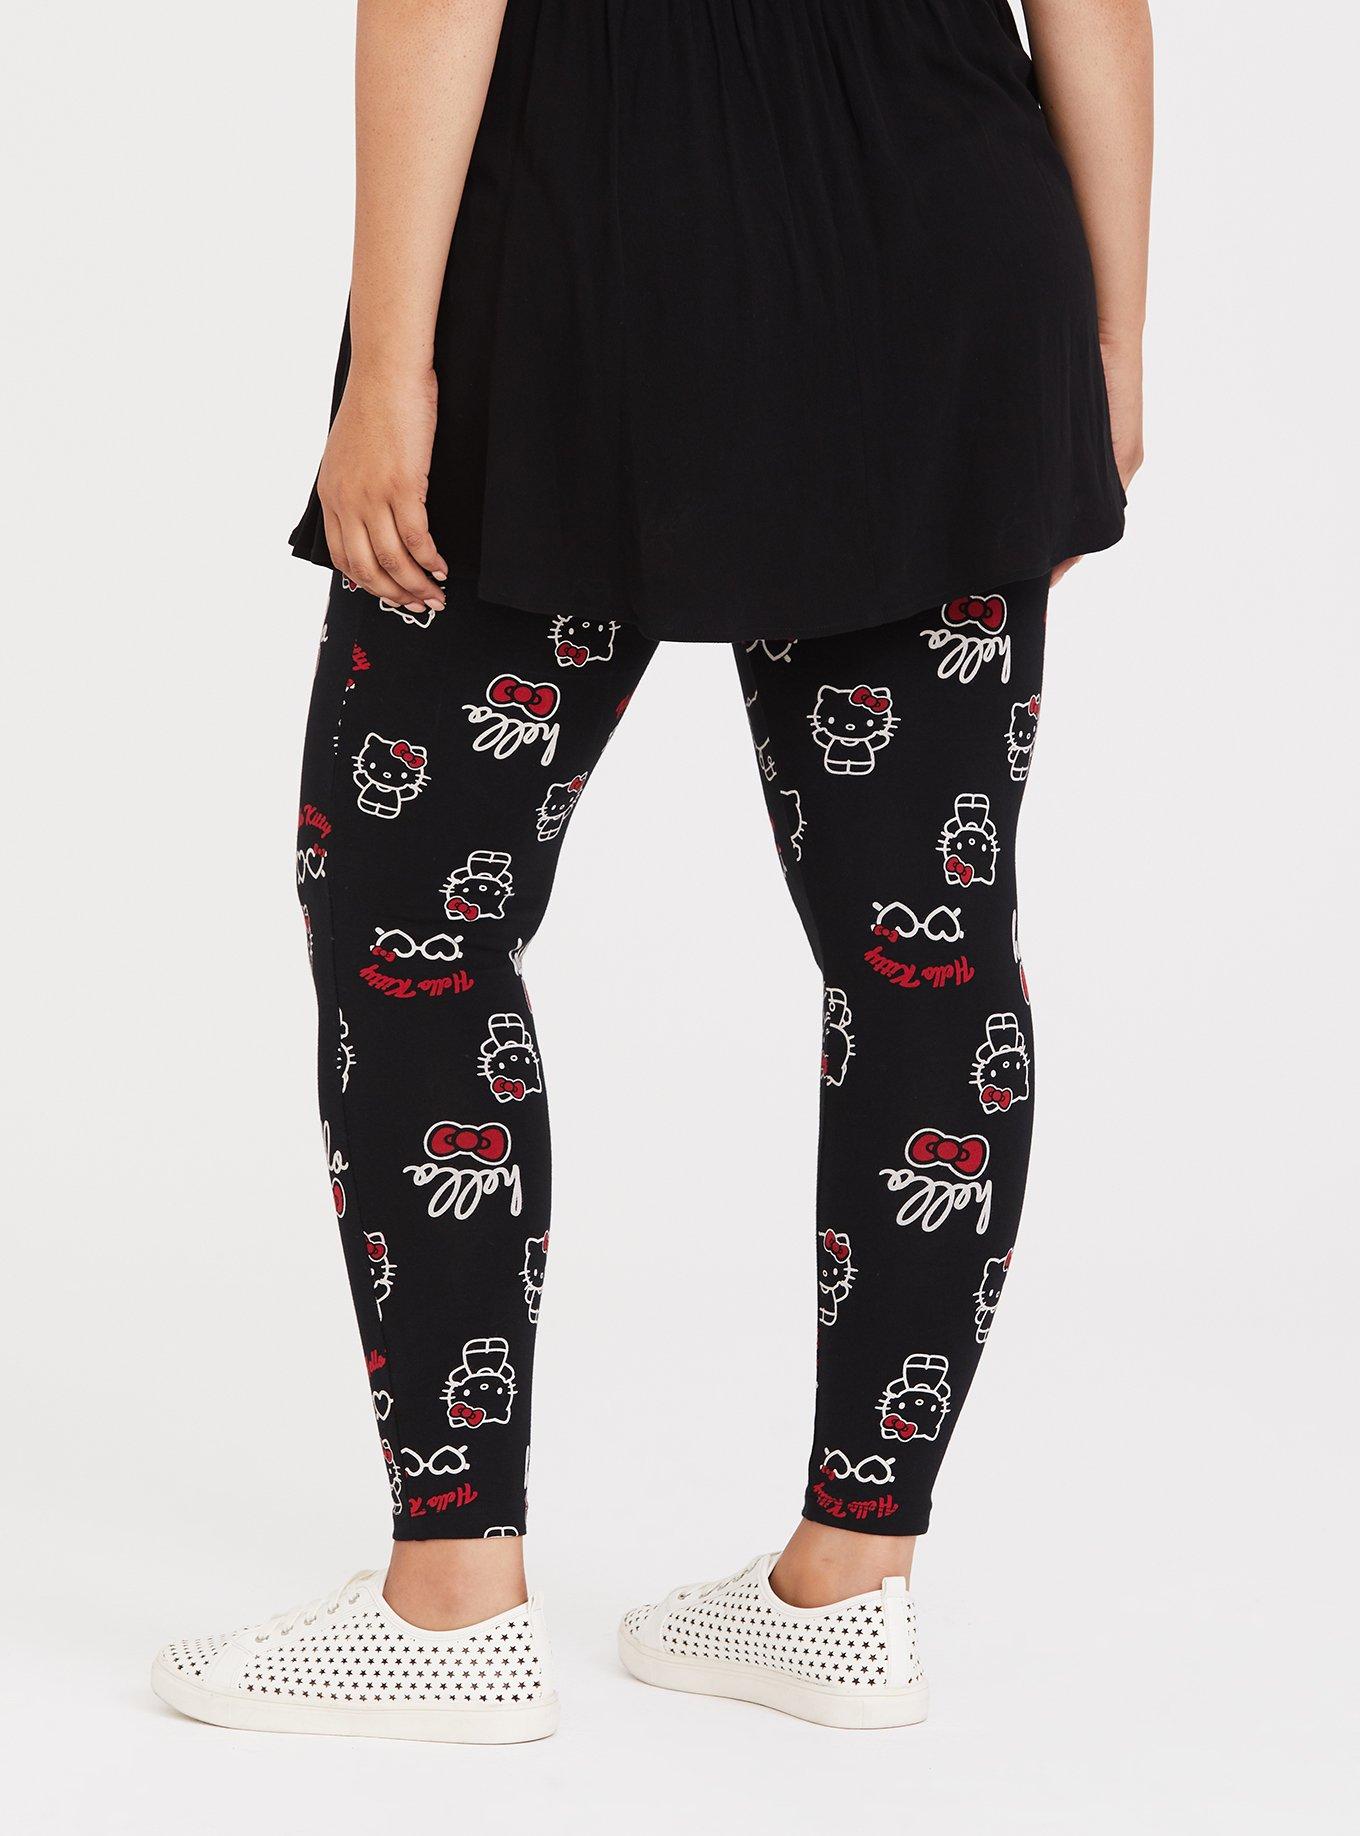 TORRID : Hello Kitty Active Bow Print Leggings  Clothes, Printed leggings,  Workout outfit inspiration